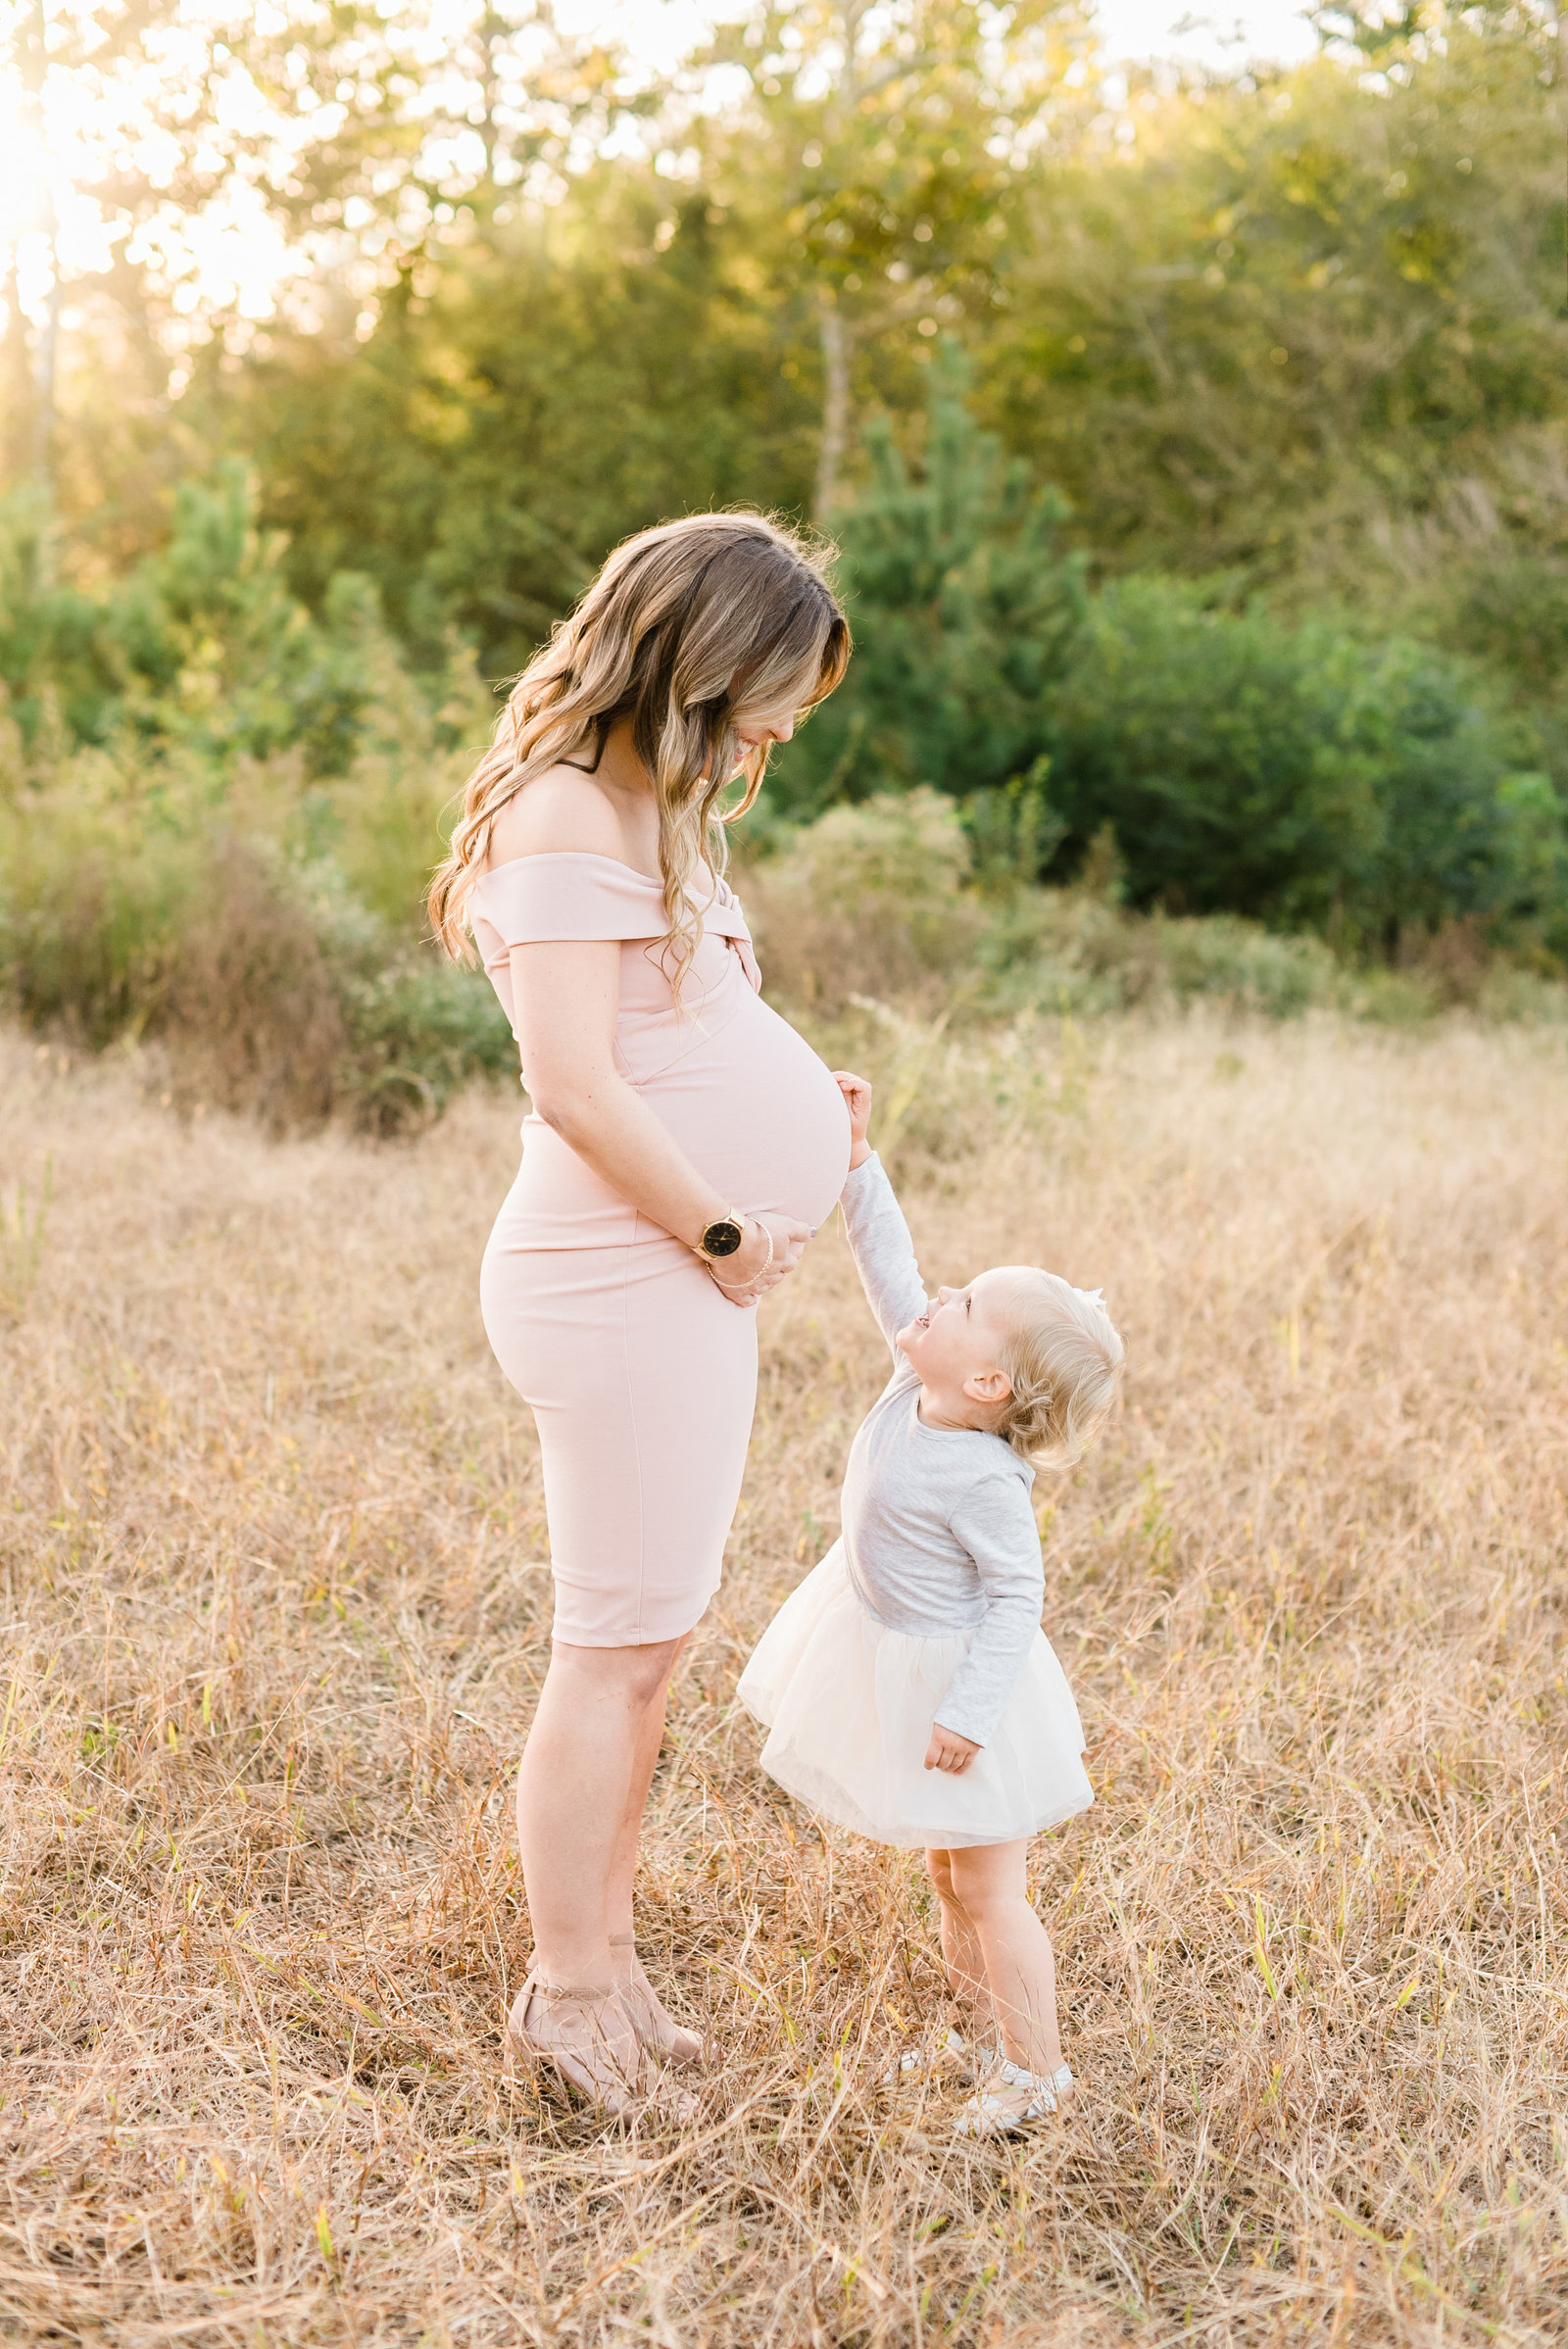 Toddler daughter touching the belly of her pregnant mom and smiling during their Raleigh maternity session. Photographed by Raleigh maternity photographer A.J. Dunlap Photography